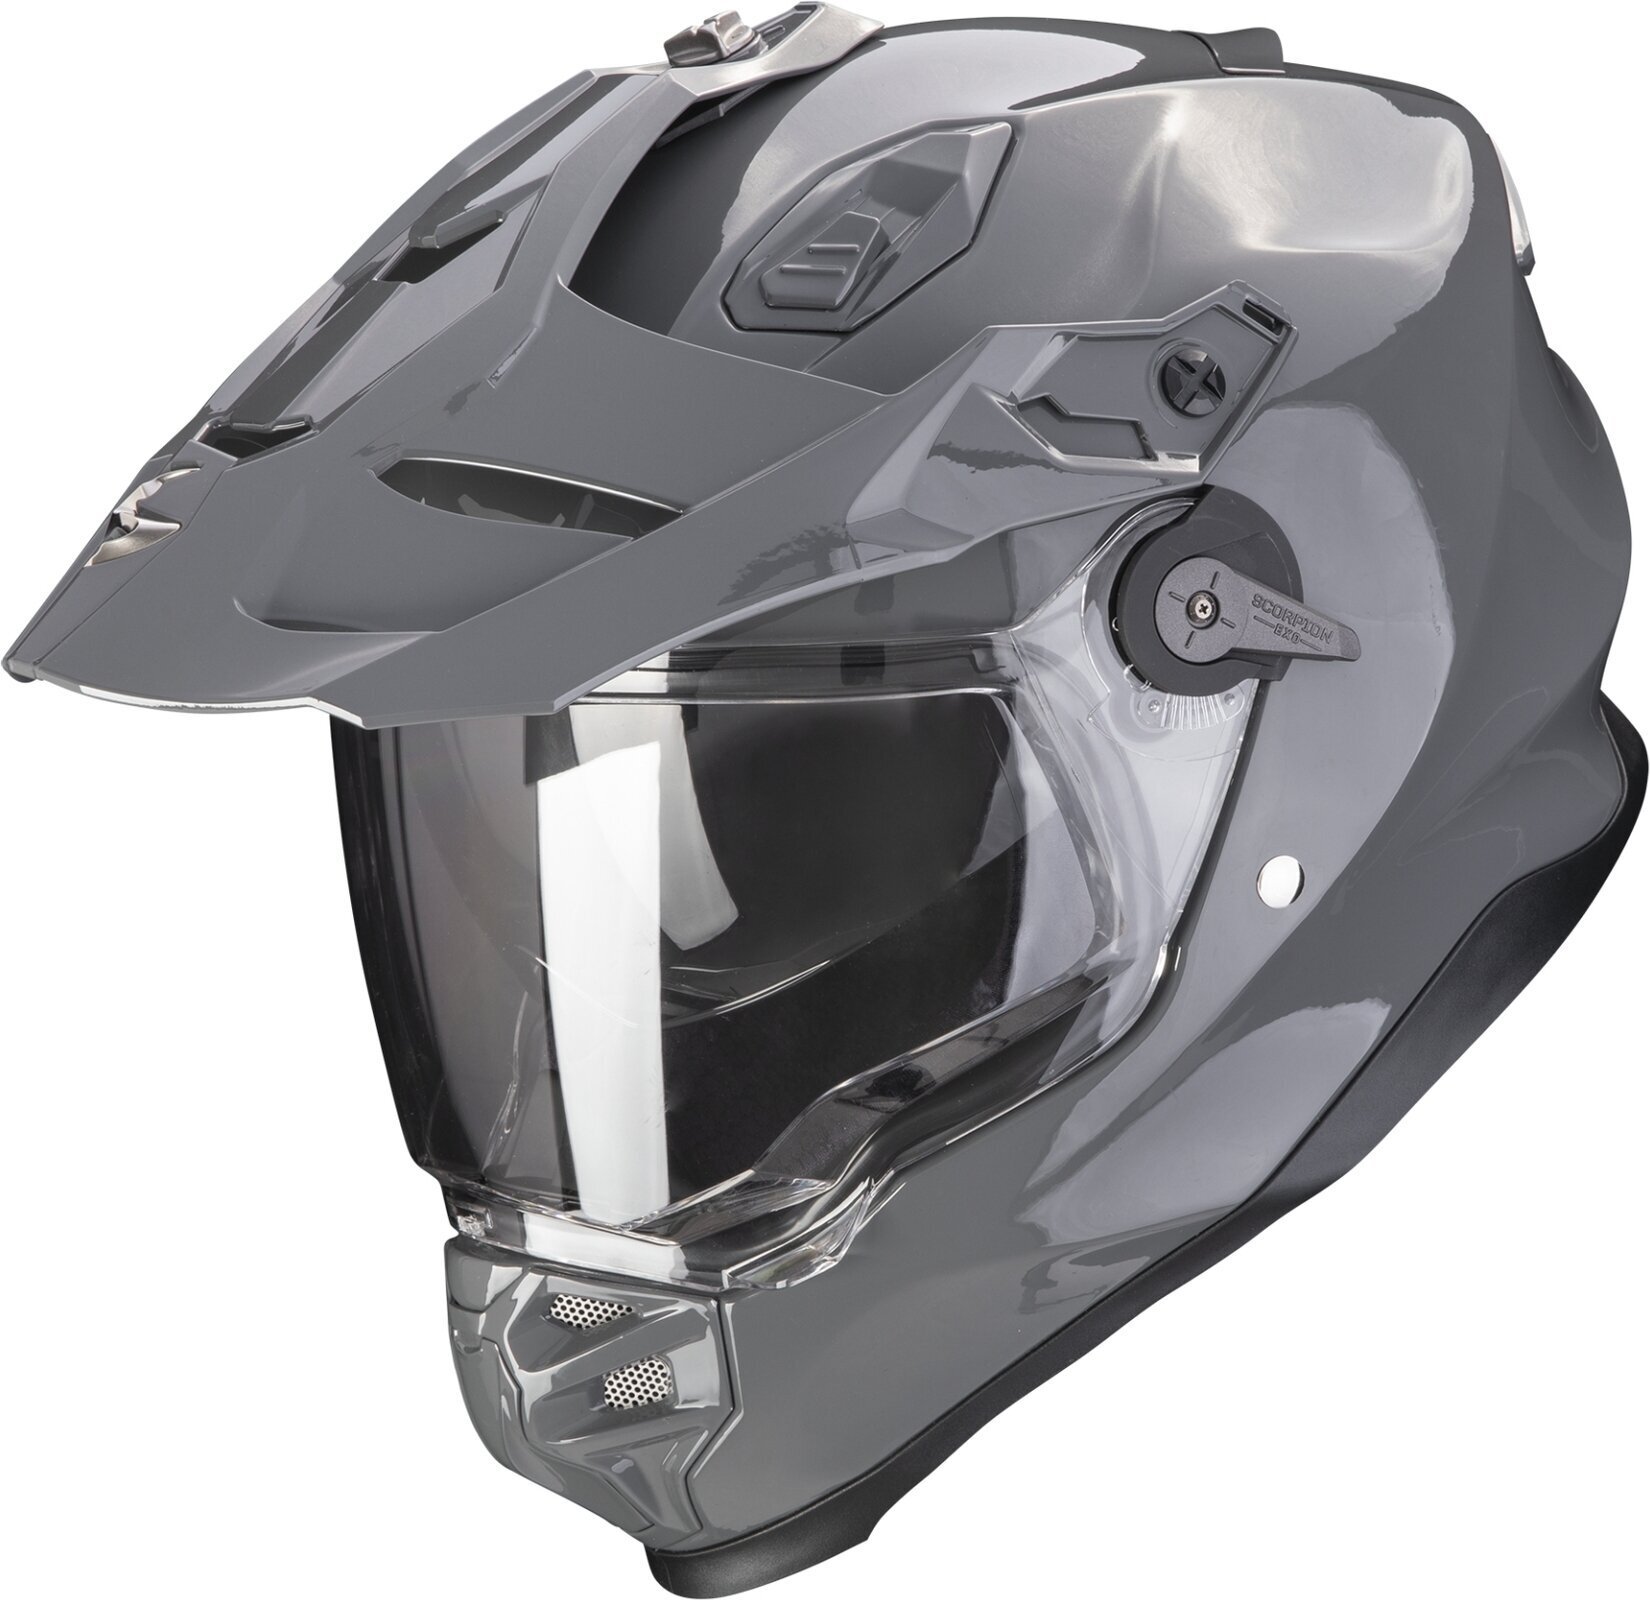 Helm Scorpion ADF-9000 AIR SOLID Cement Grey S Helm